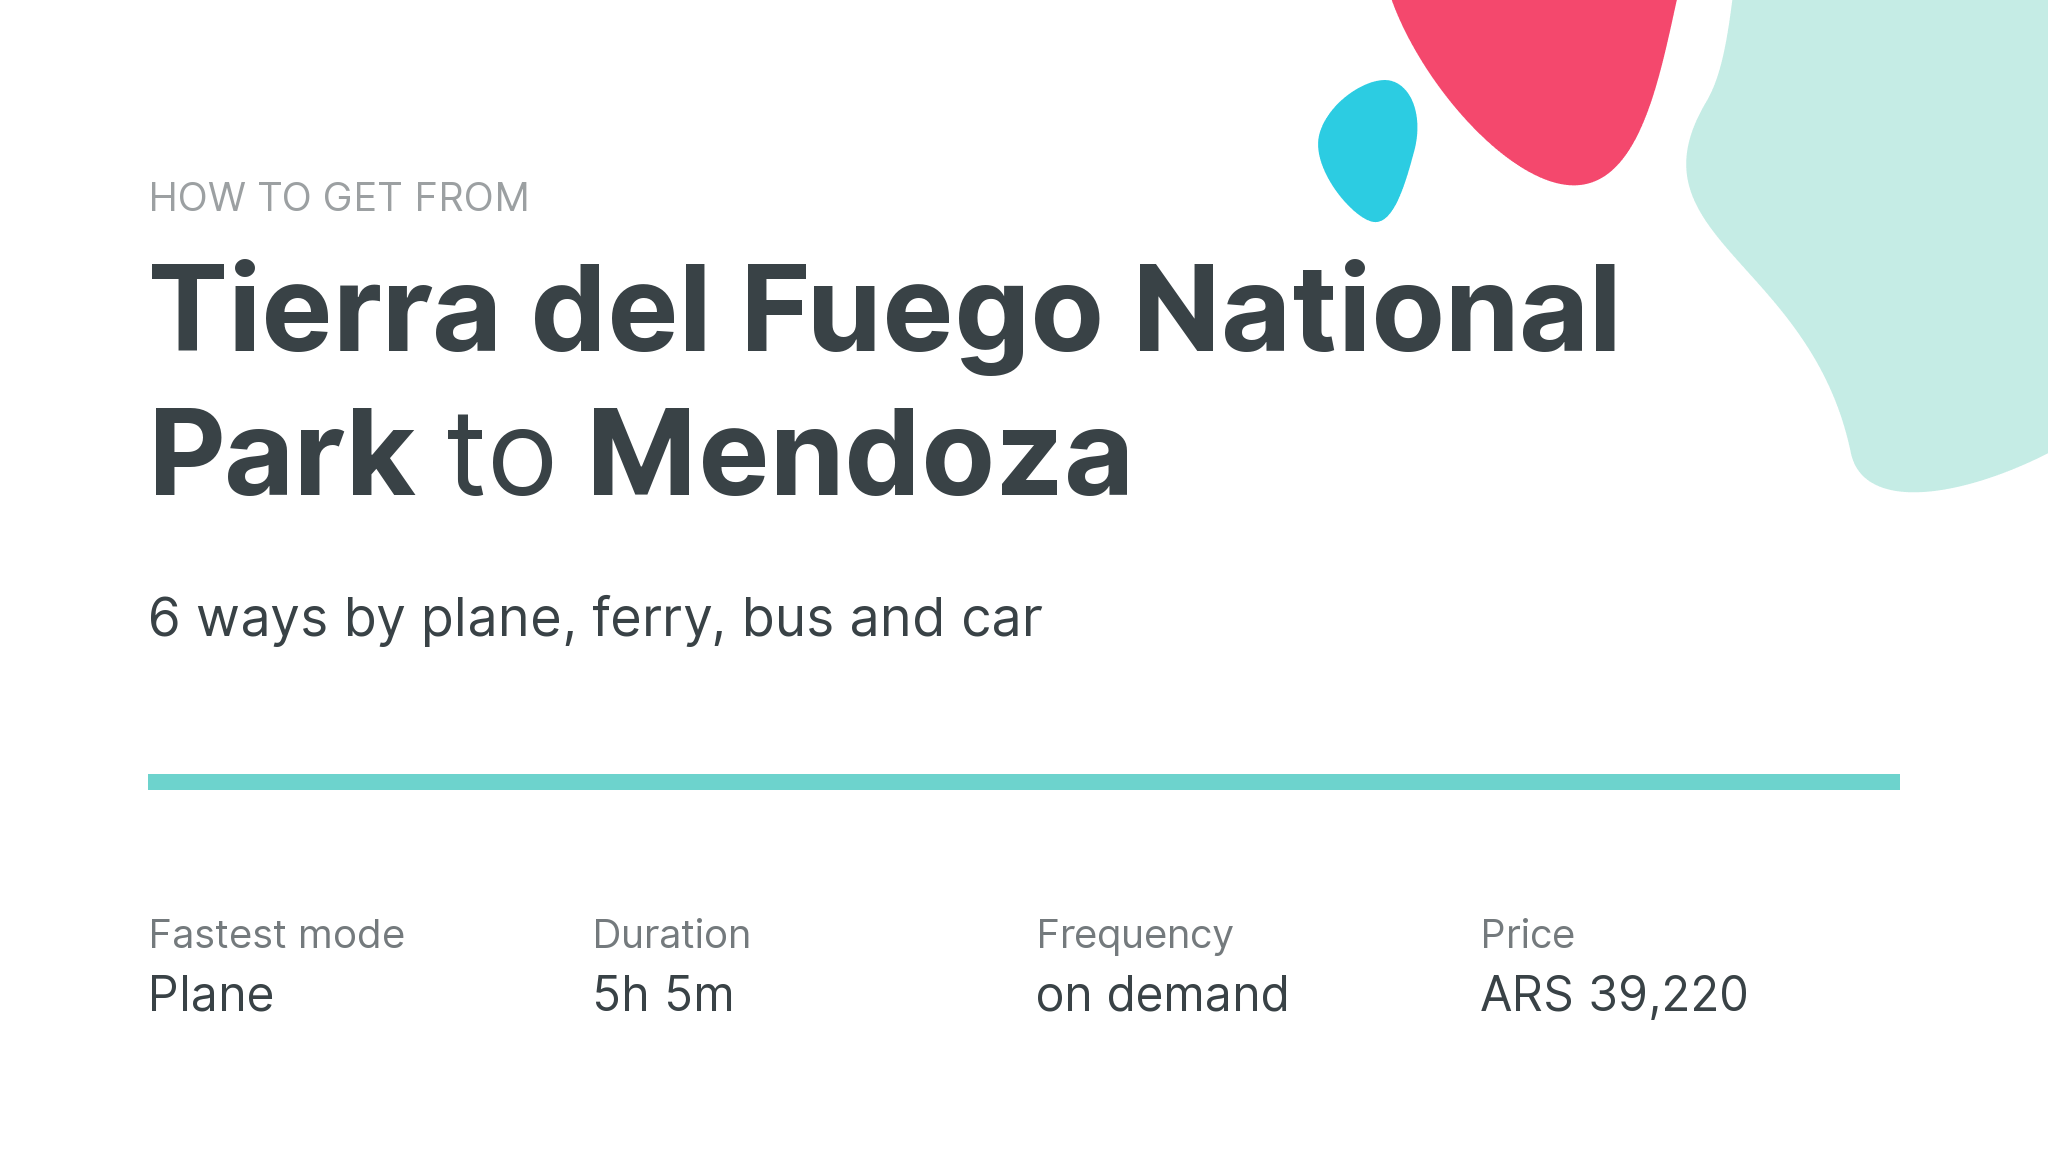 How do I get from Tierra del Fuego National Park to Mendoza